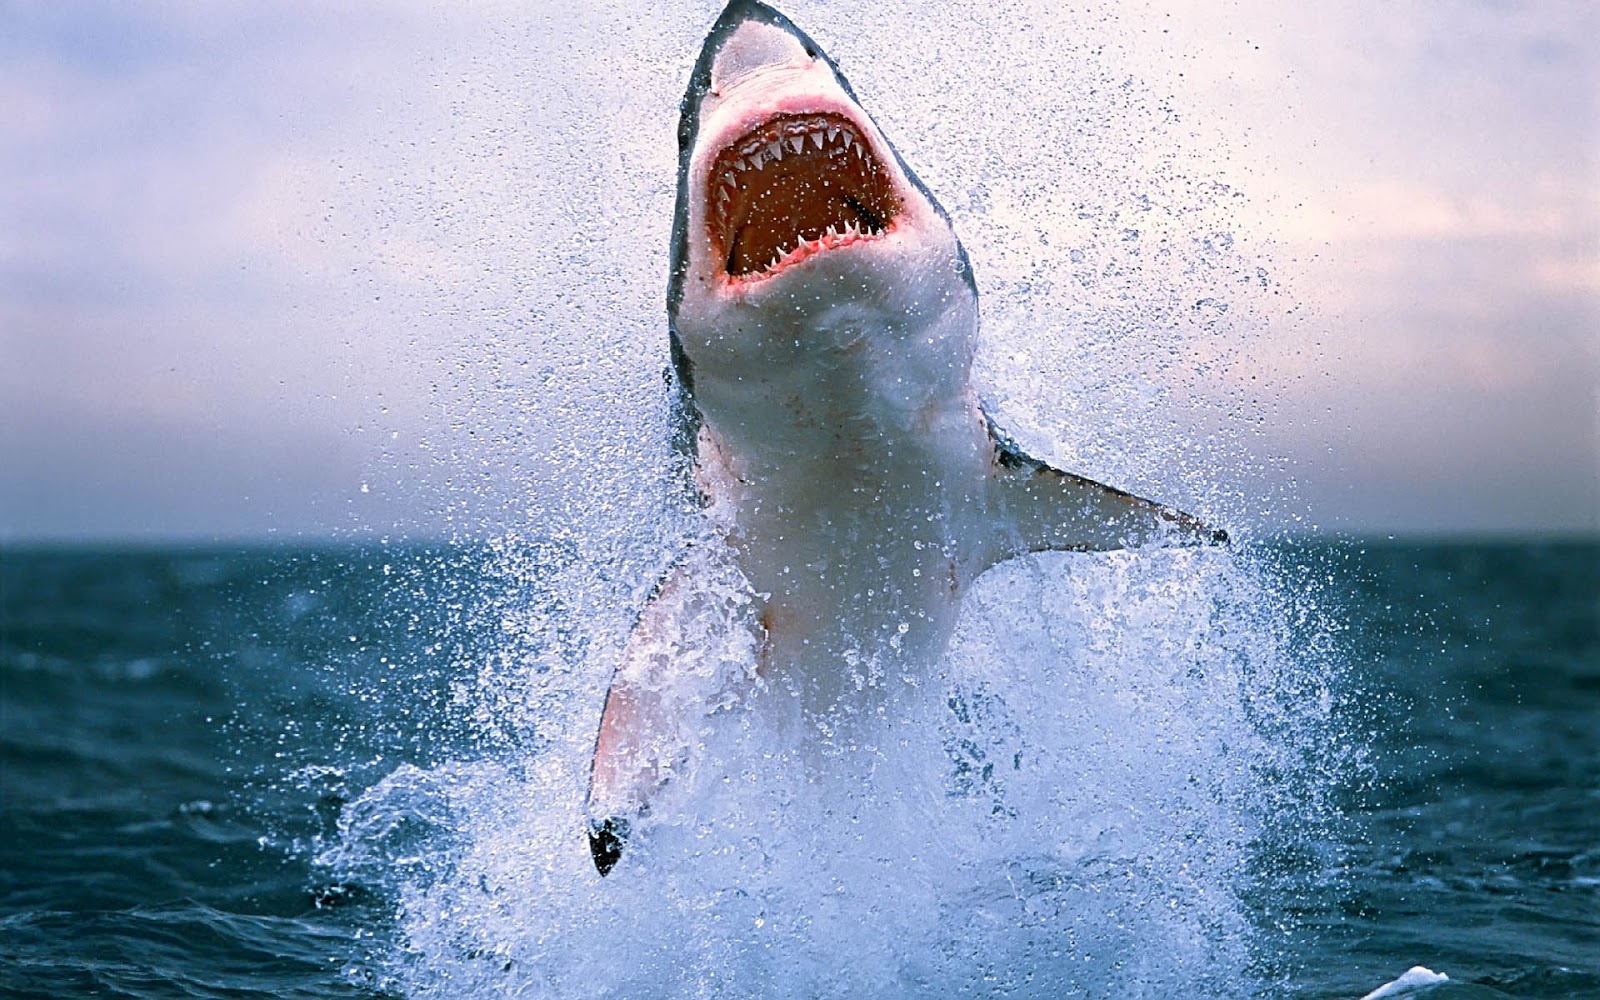 Spectacular shark wallpaper with a attacking shark jumping out of the 1600x1000